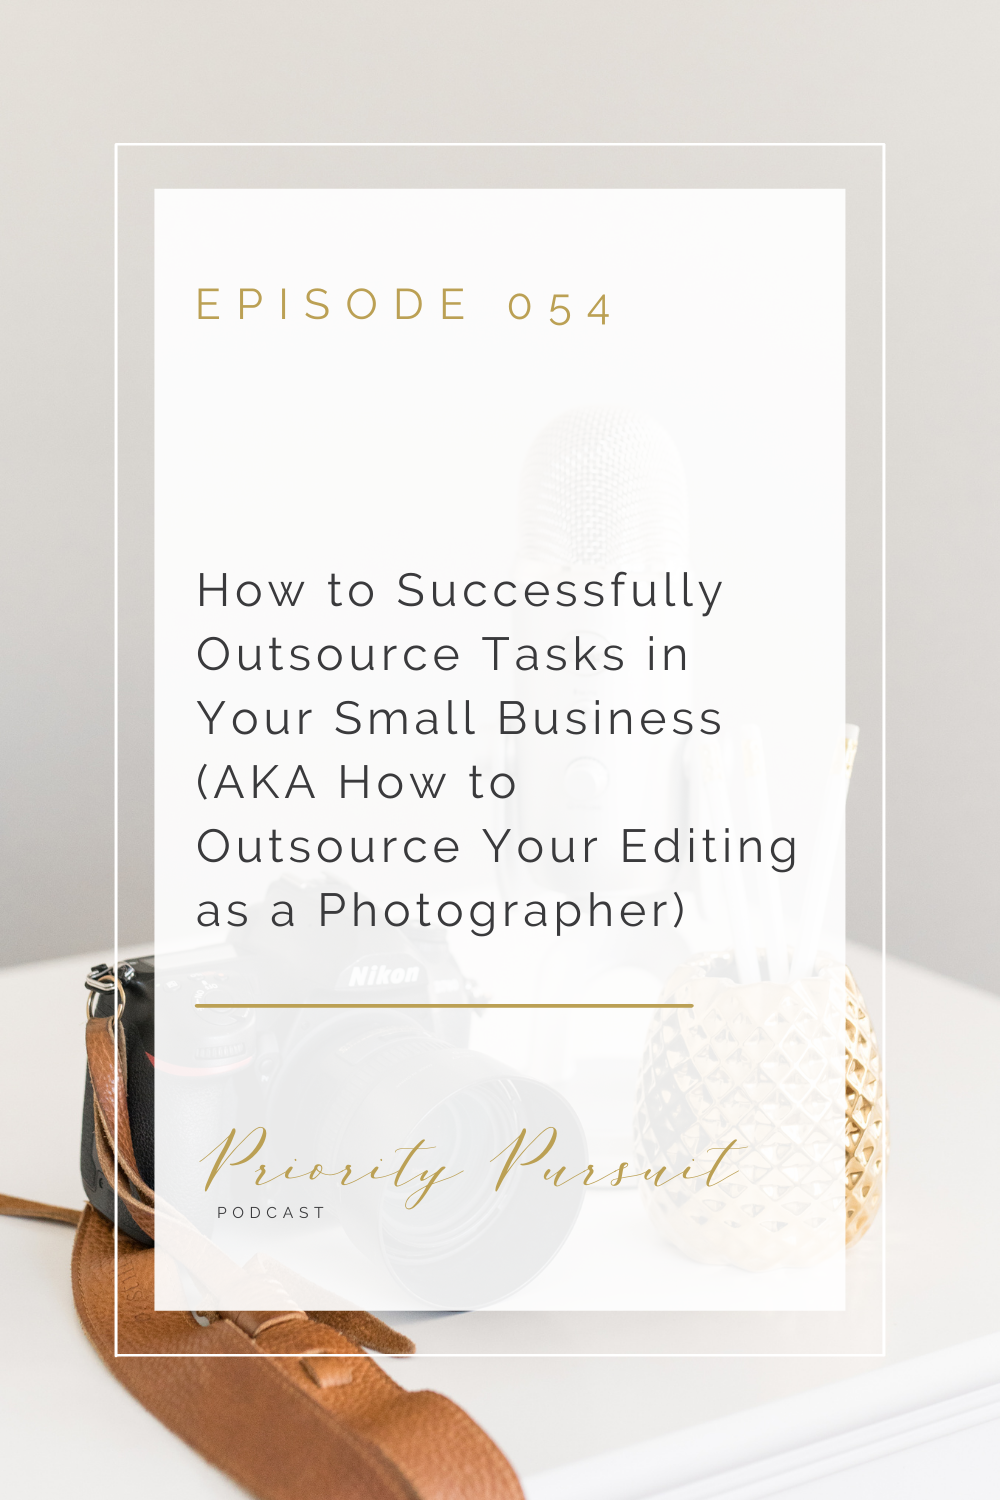 Victoria Rayburn shares how to successfully outsource tasks in your small business and how photographer’s can outsource their editing in this episode of “Priority Pursuit.”